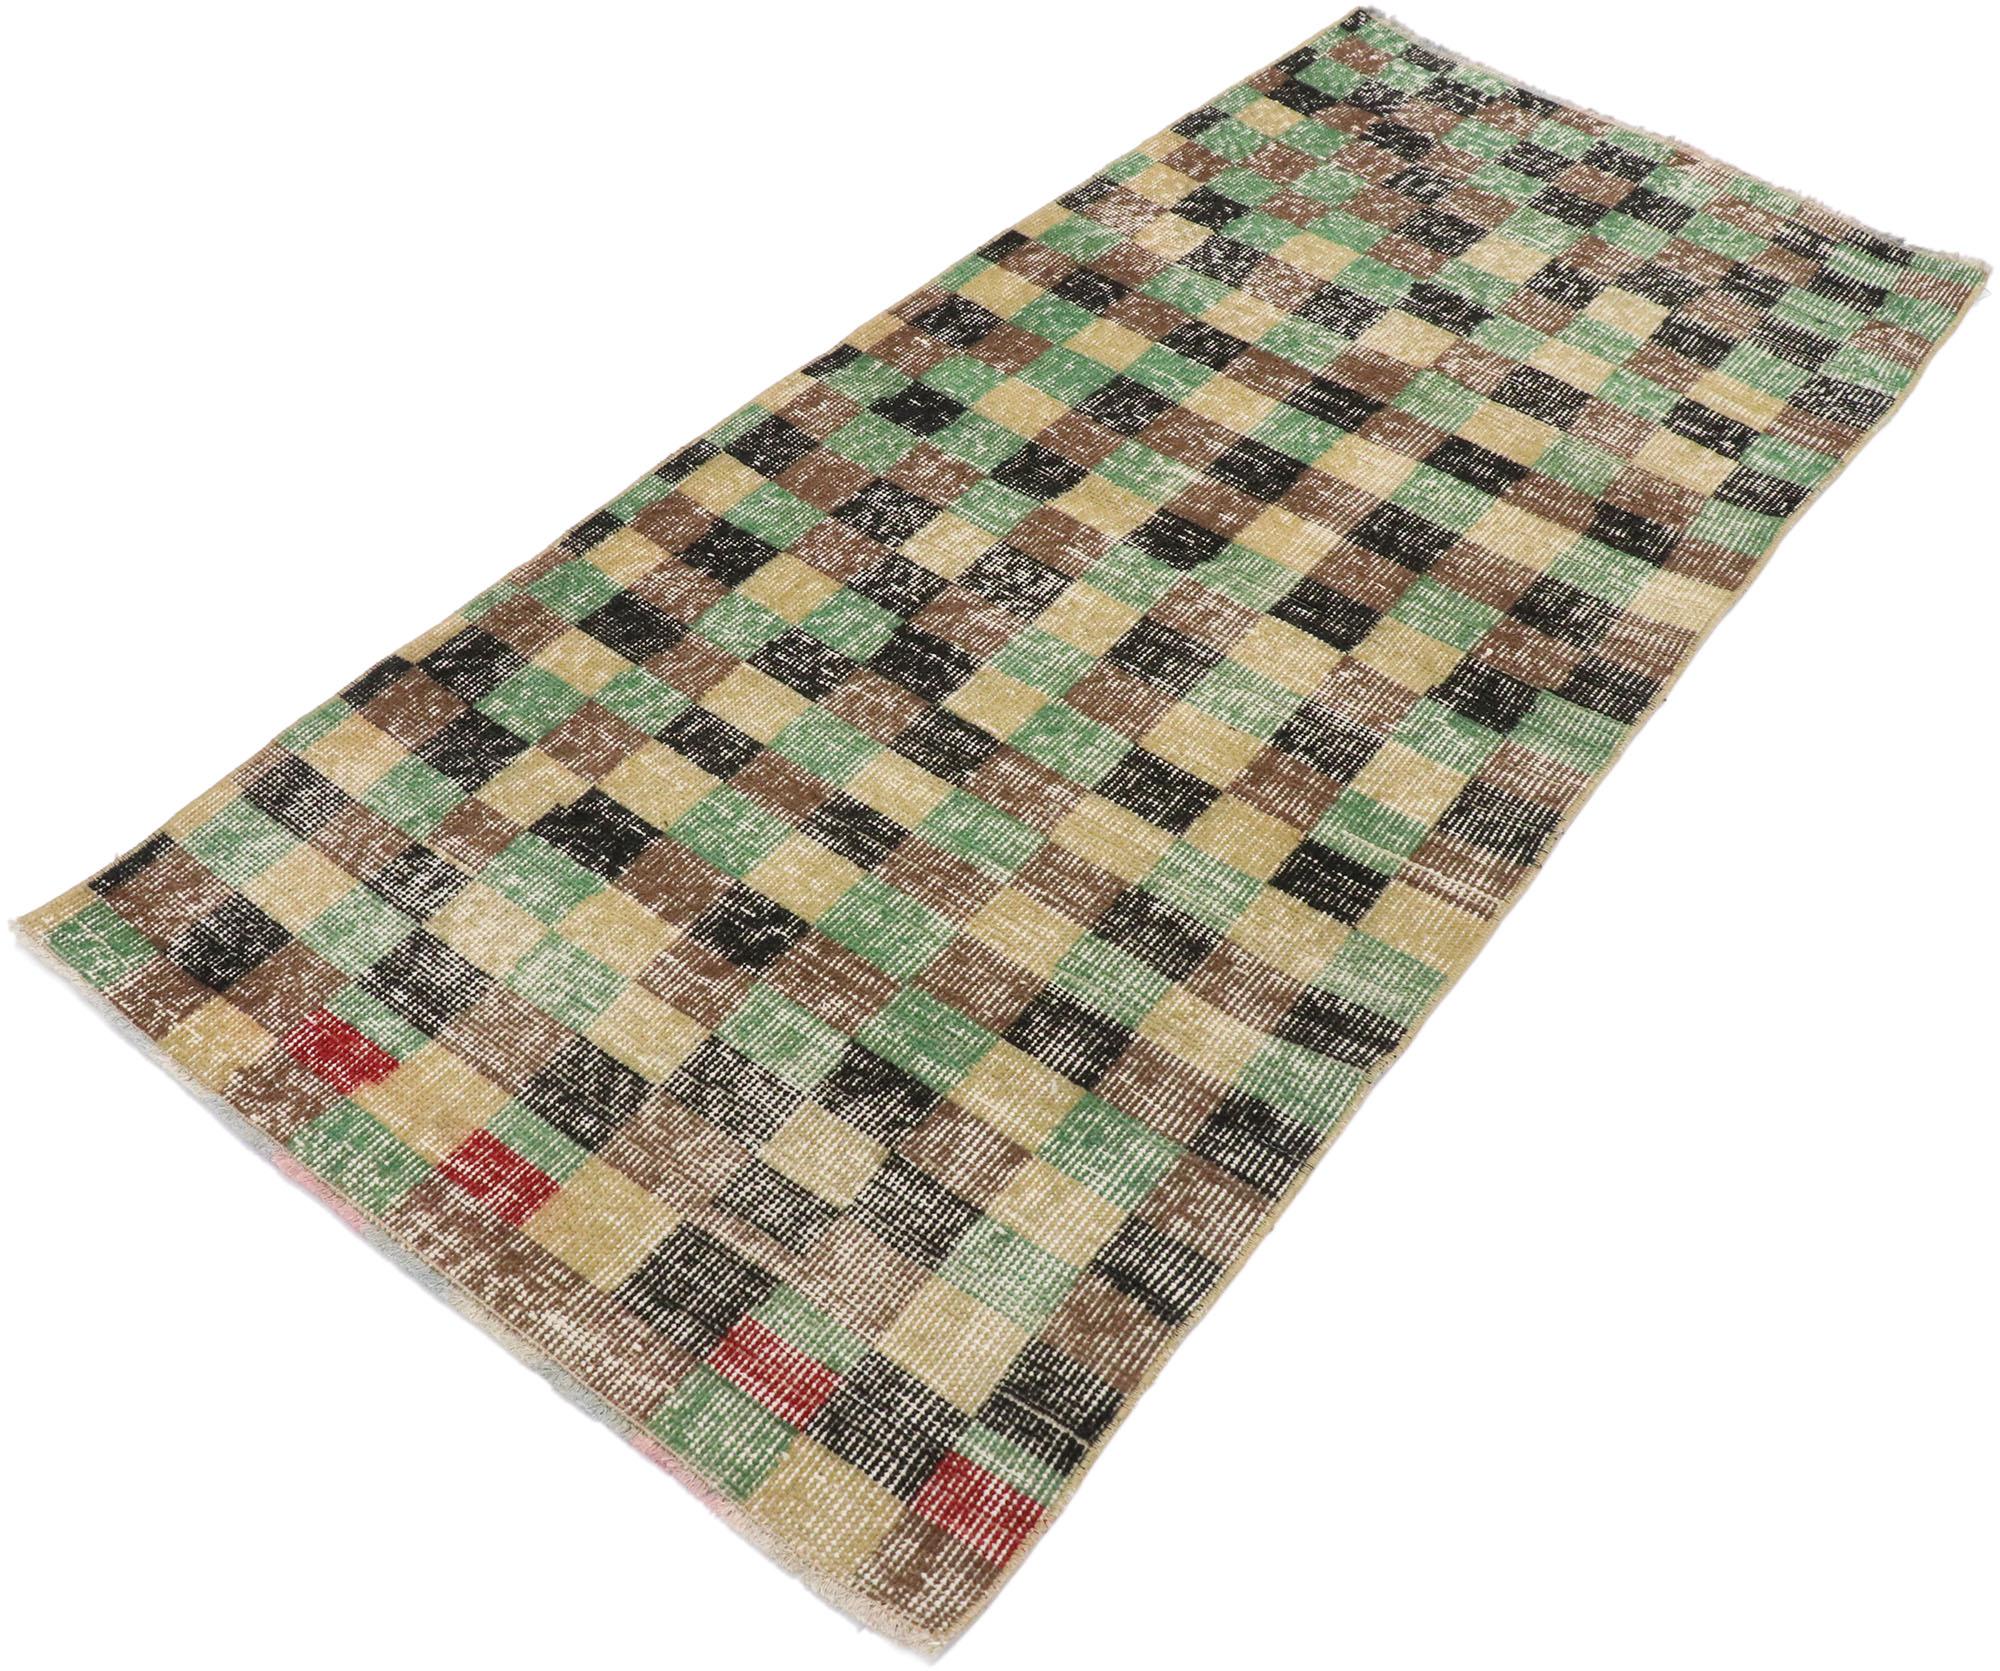 53286 distressed vintage Turkish Sivas rug with Rustic Cubist style. This hand knotted wool distressed vintage Turkish Sivas rug features an all-over checkerboard pattern comprised of alternating green, brown, black, yellow, and red squares. Gentle